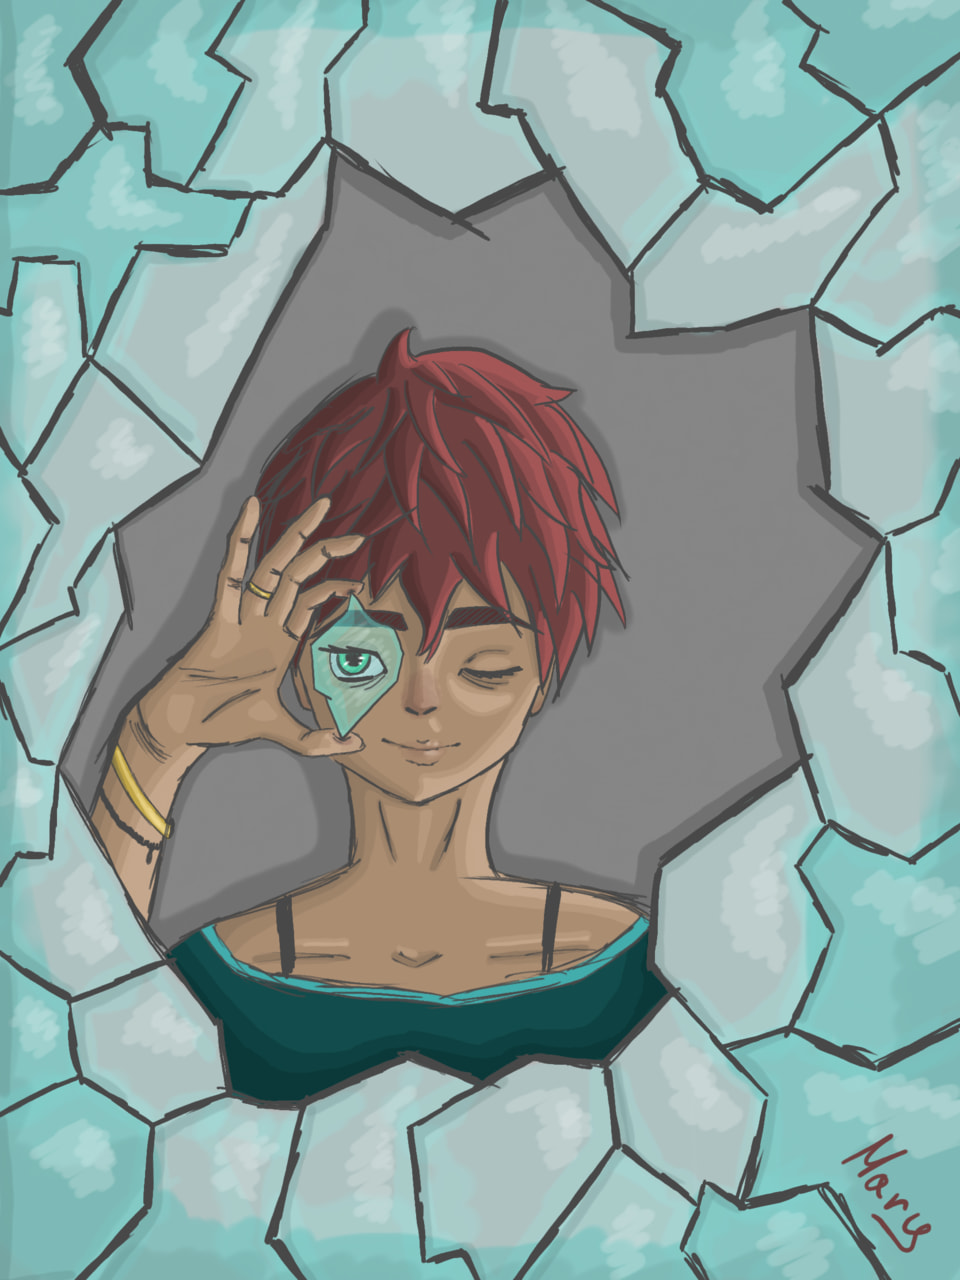 Inktober day 16: It took me longer than i thought so i hope you like it. #inktober #Inktober2018 #Angular #girl #shorthair #Glass #redhair #eye #bracelet #ring #happy (check out my profile if you bored)